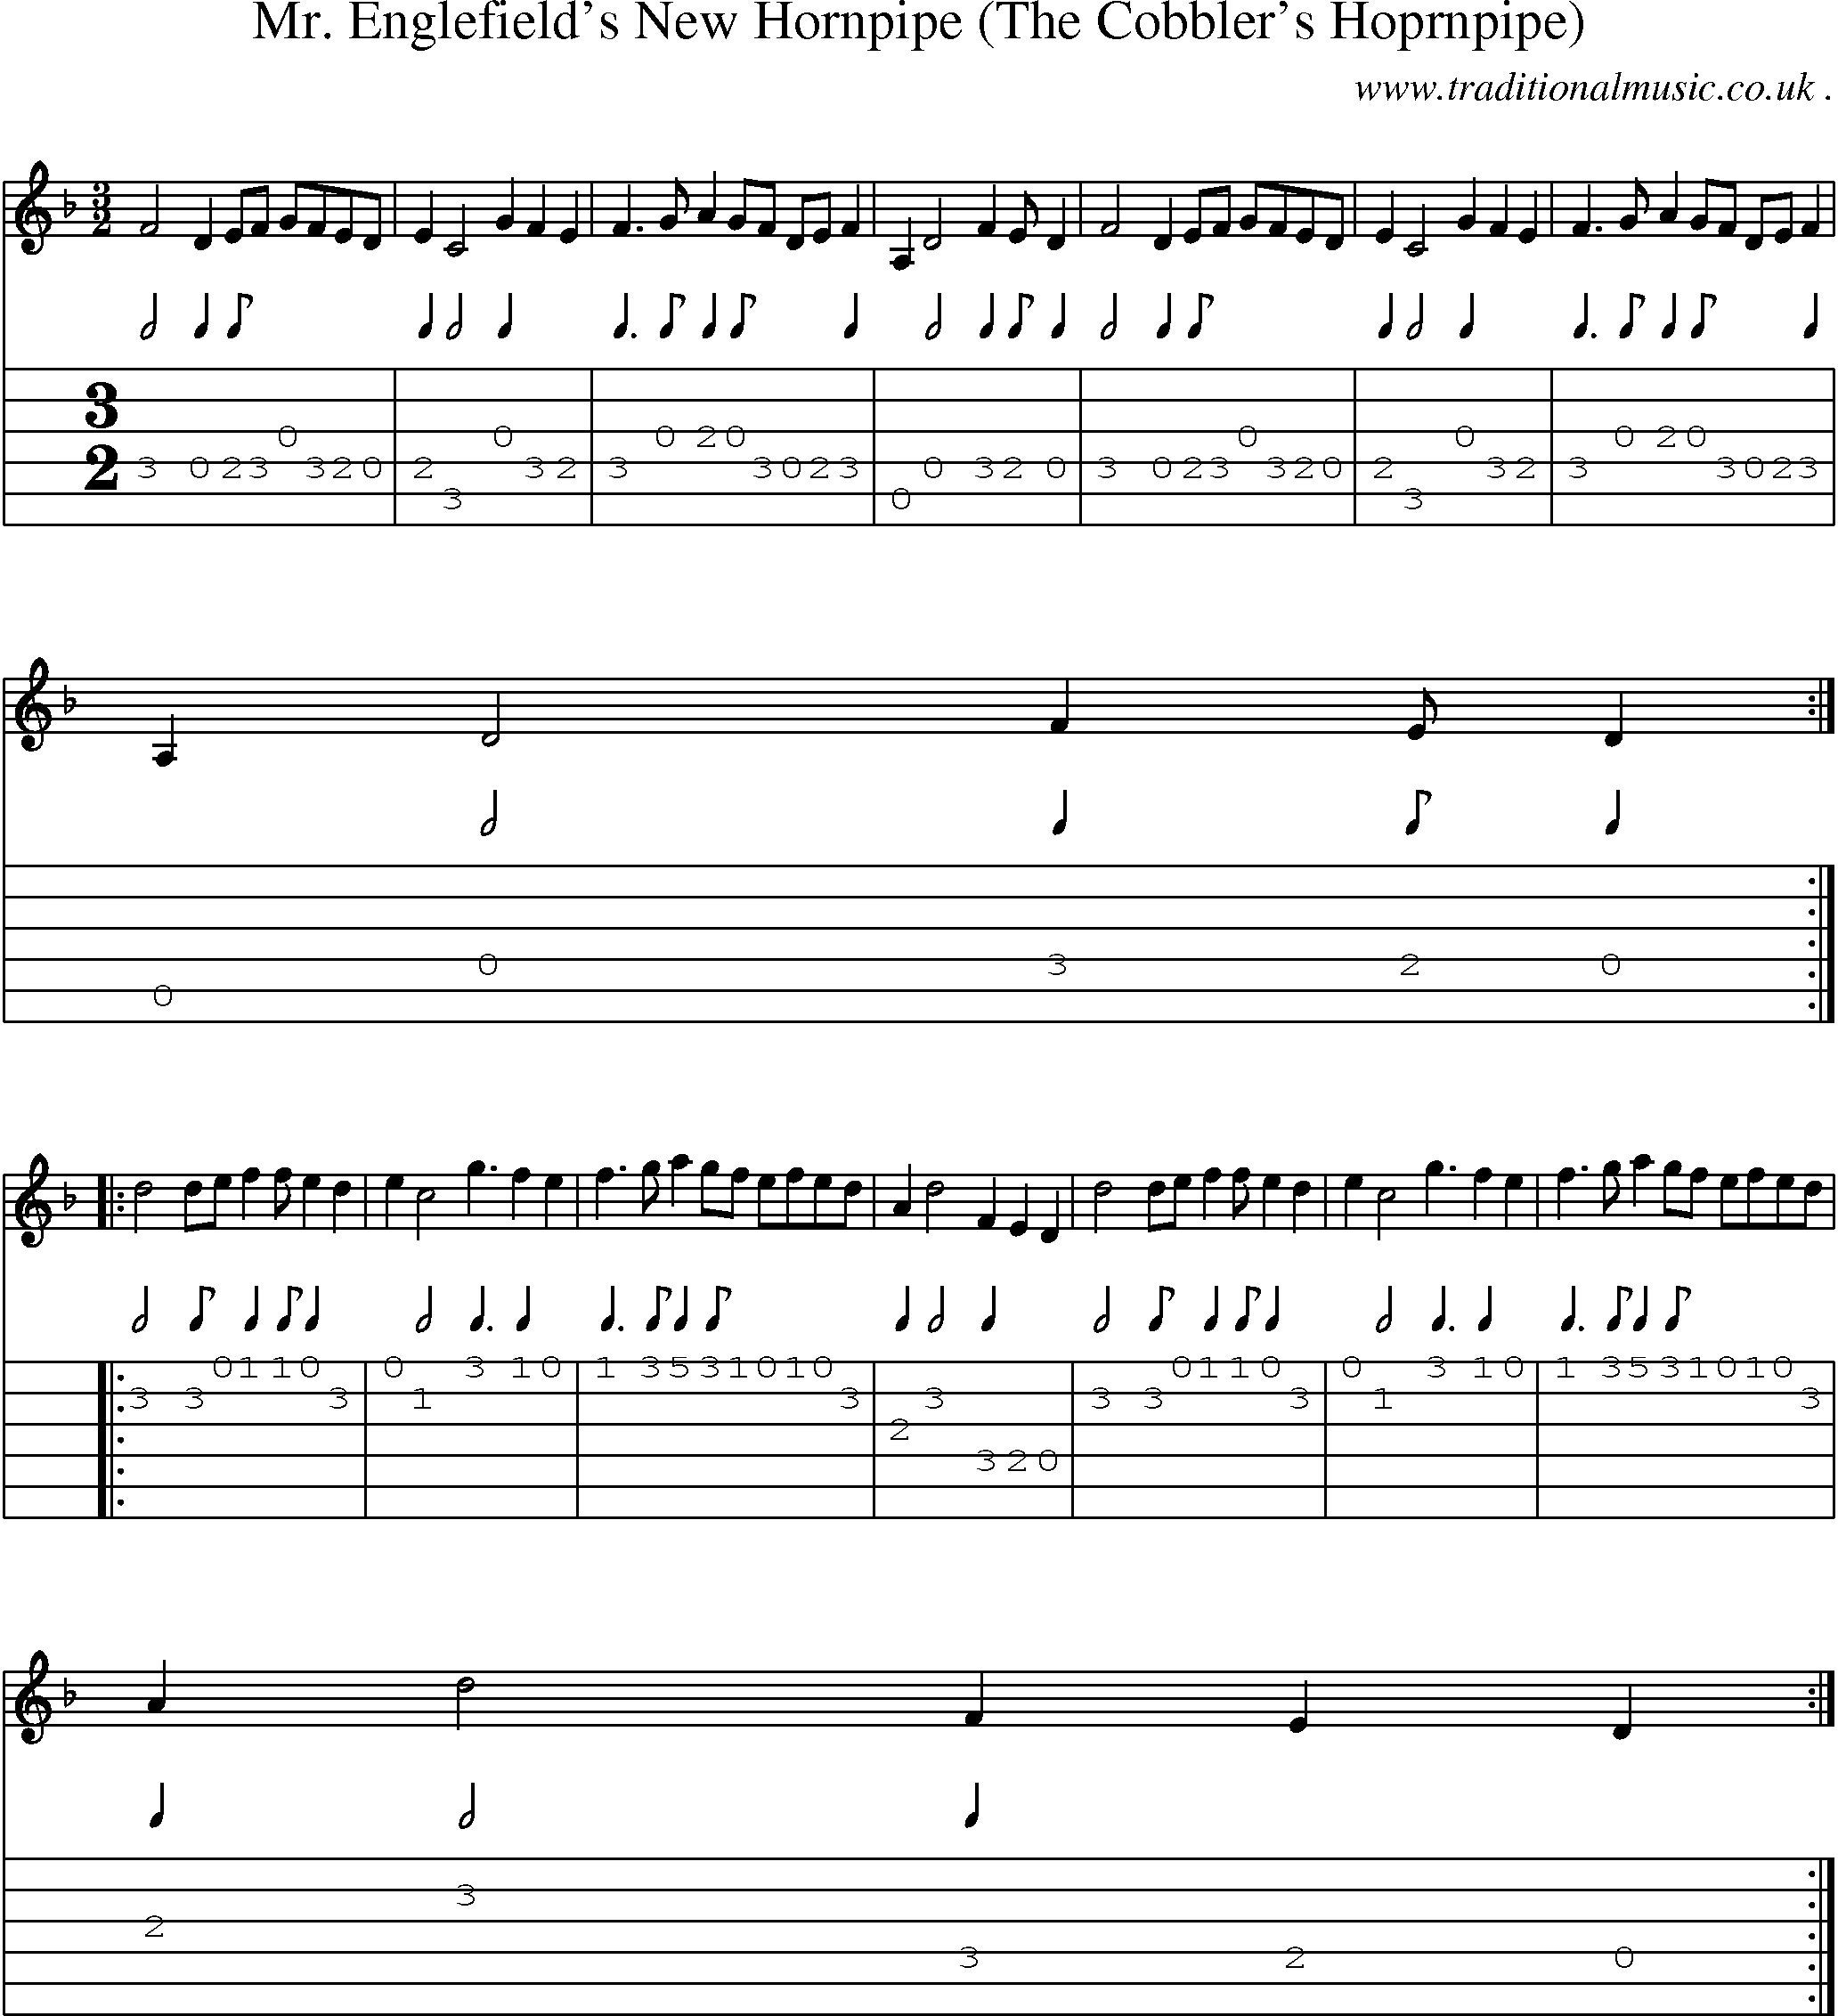 Sheet-Music and Guitar Tabs for Mr Englefields New Hornpipe (the Cobblers Hoprnpipe)